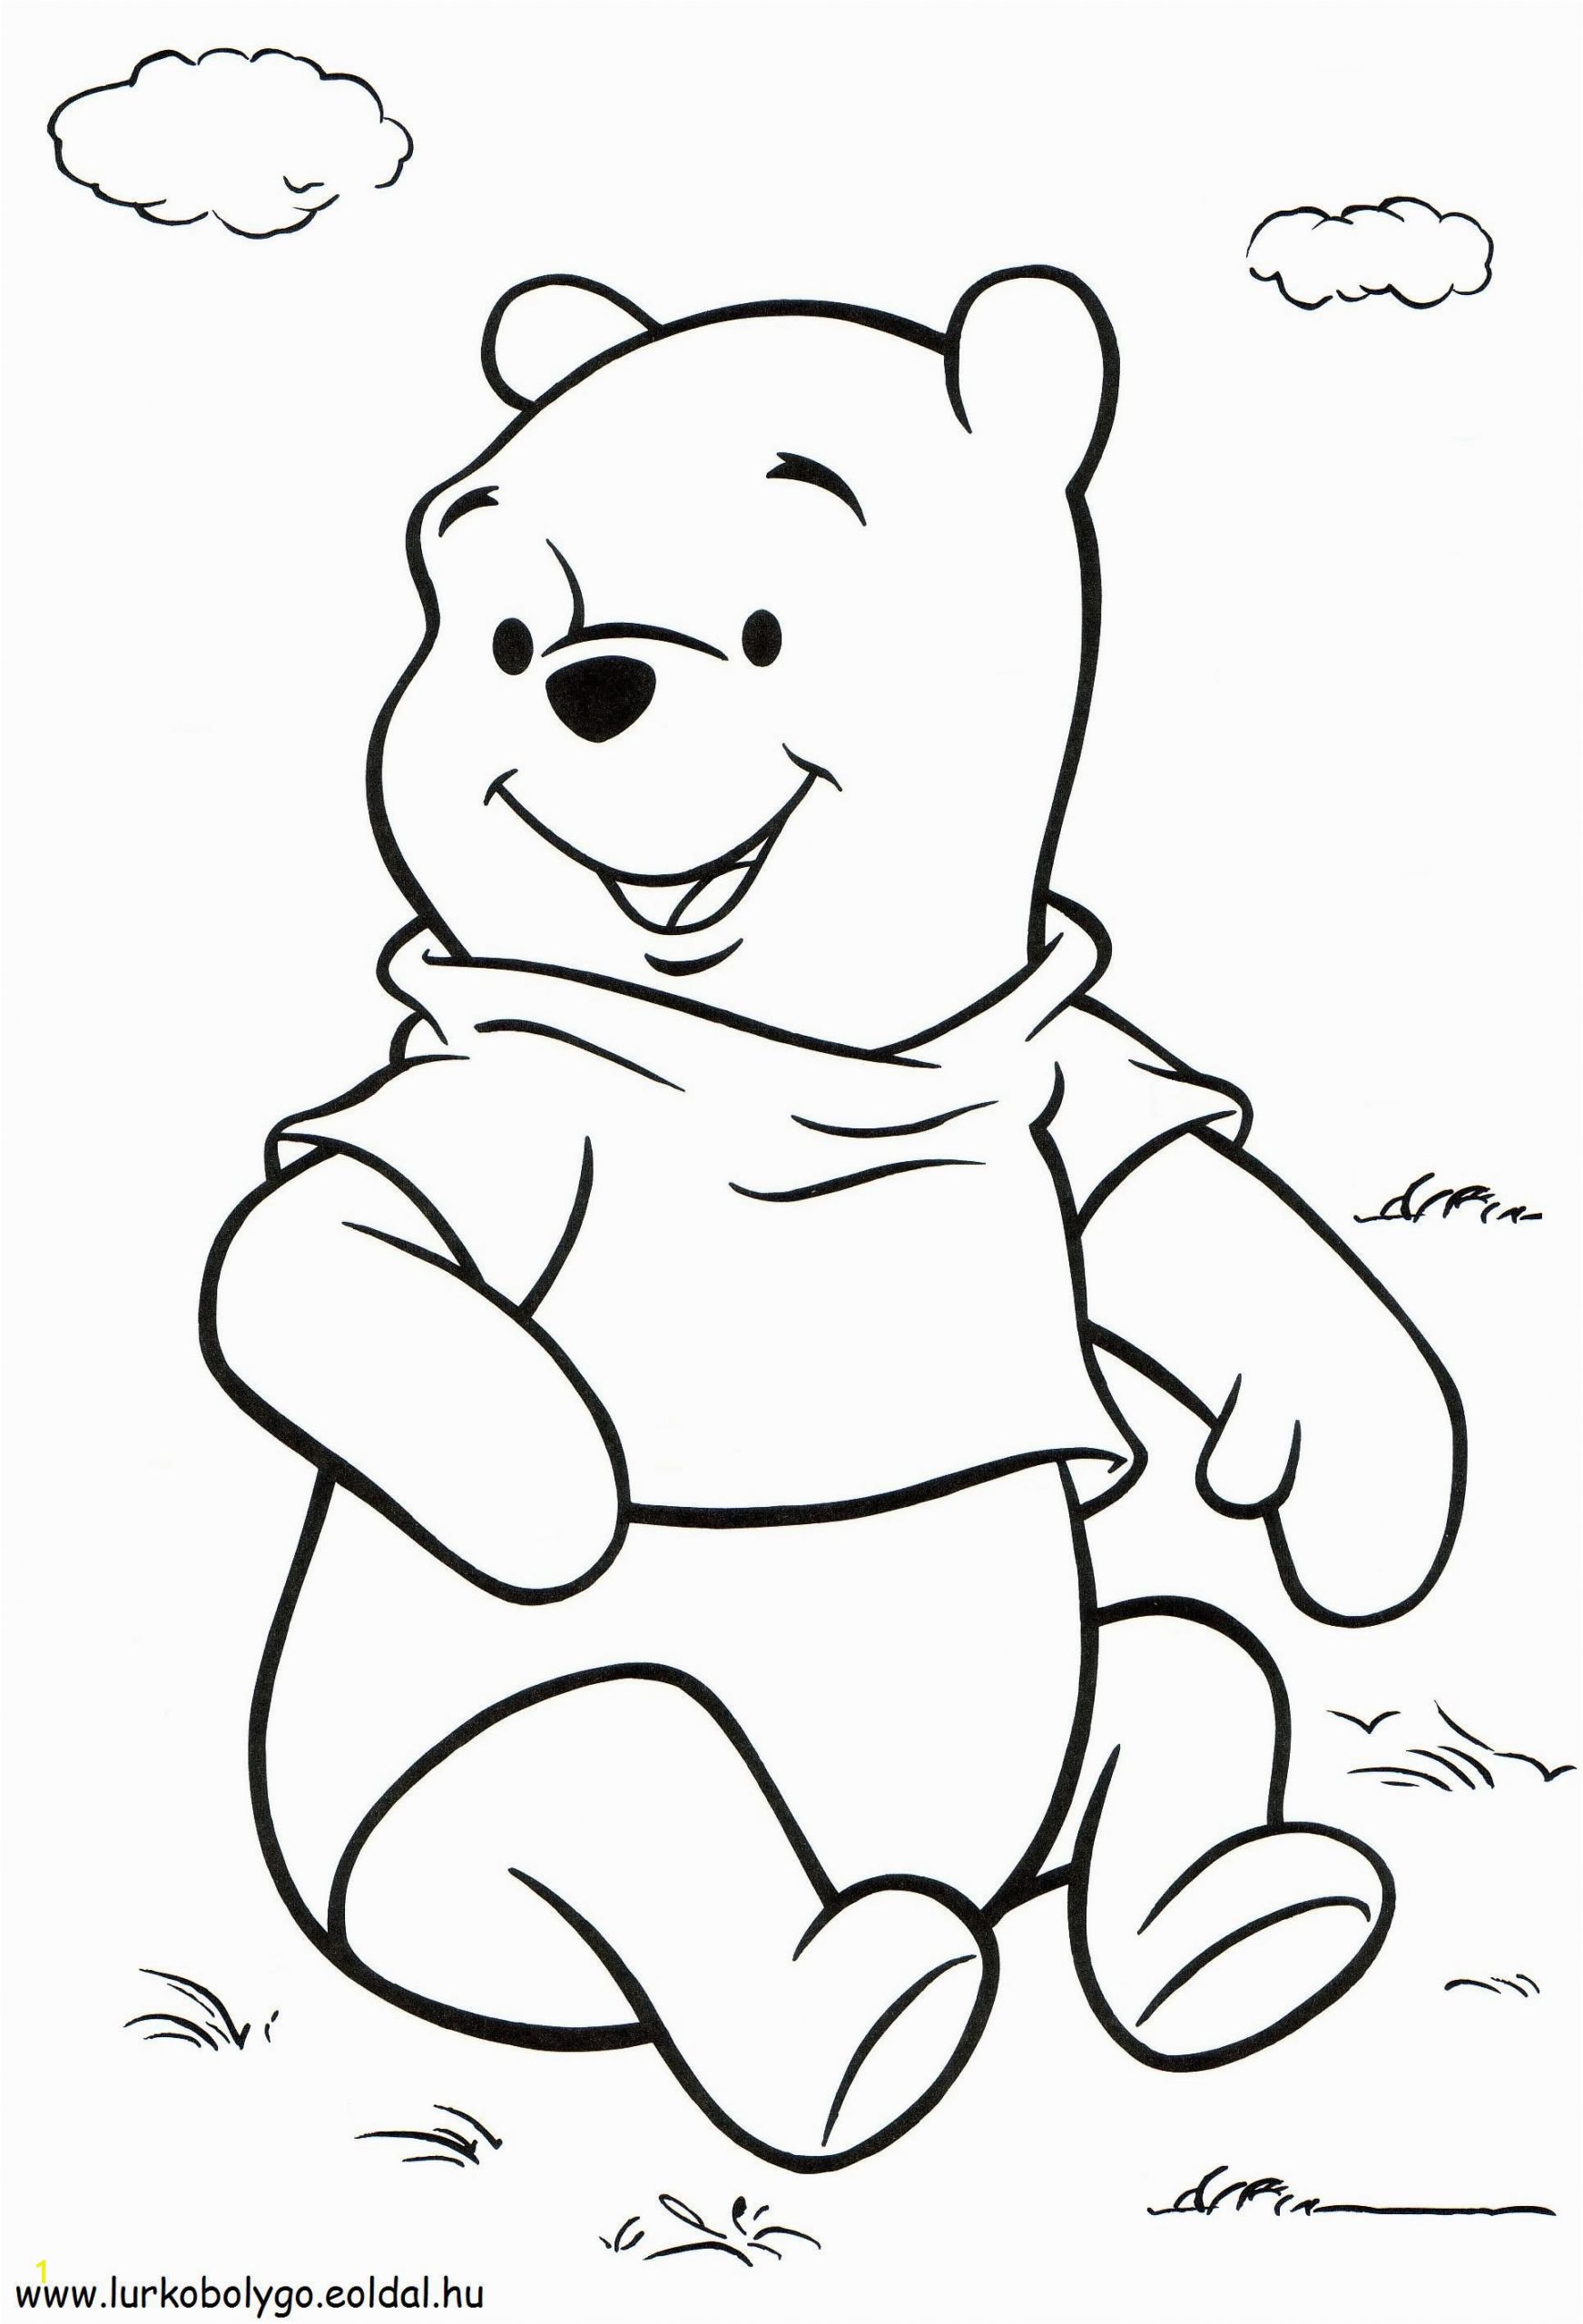 Winnie the Pooh Printable Coloring Pages Pin by Zsuzsi Takács Kovács On Winnie the Pooh Applique